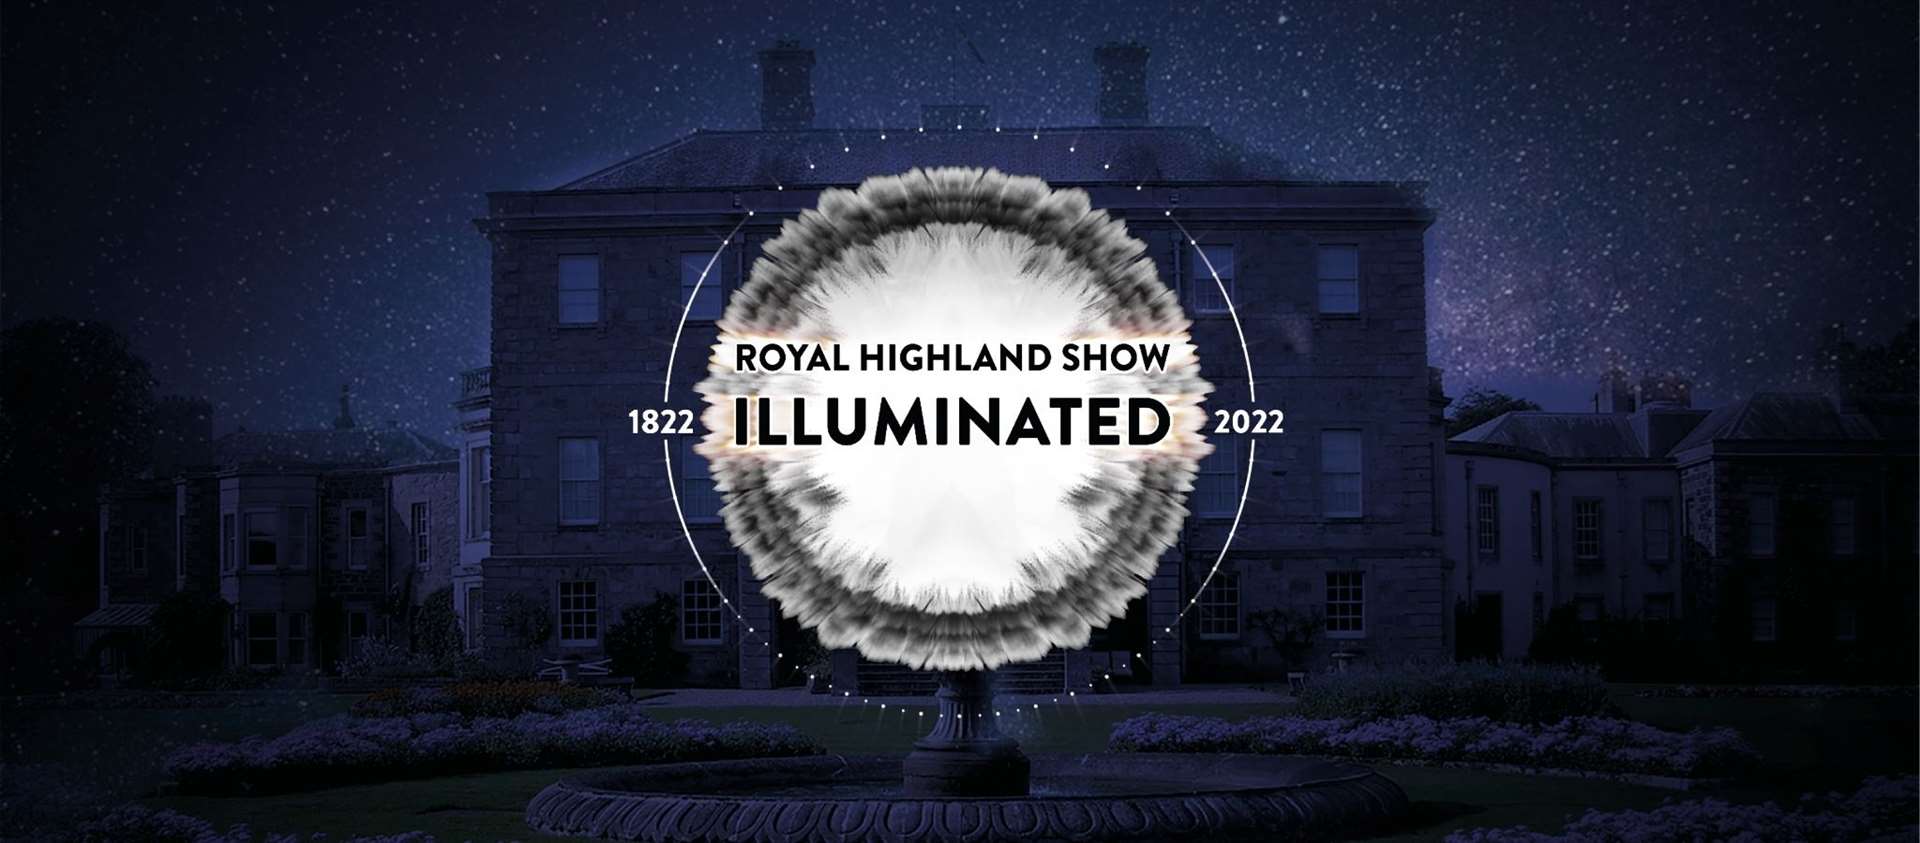 The Royal Highland Show Illuminated is set to come to the north-east at the end of next month.